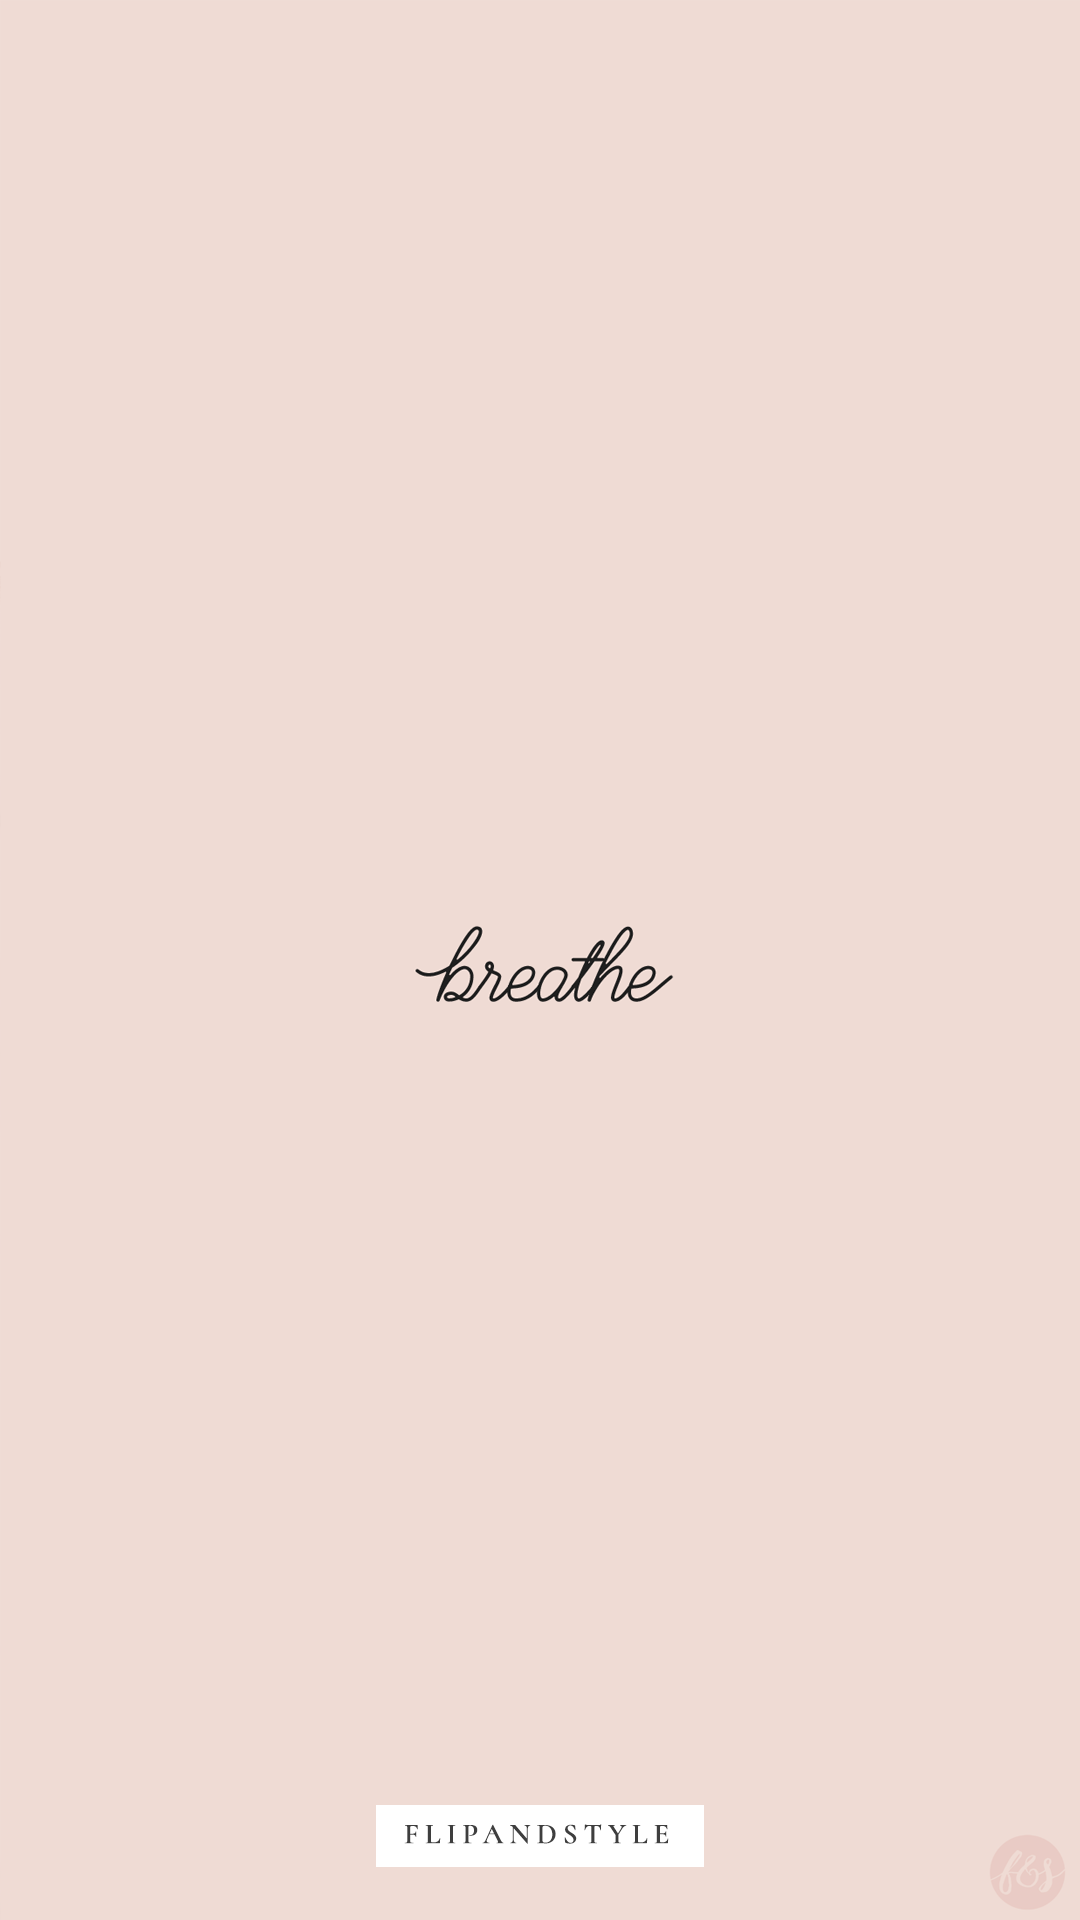 Breathe Iphone Wallpapers